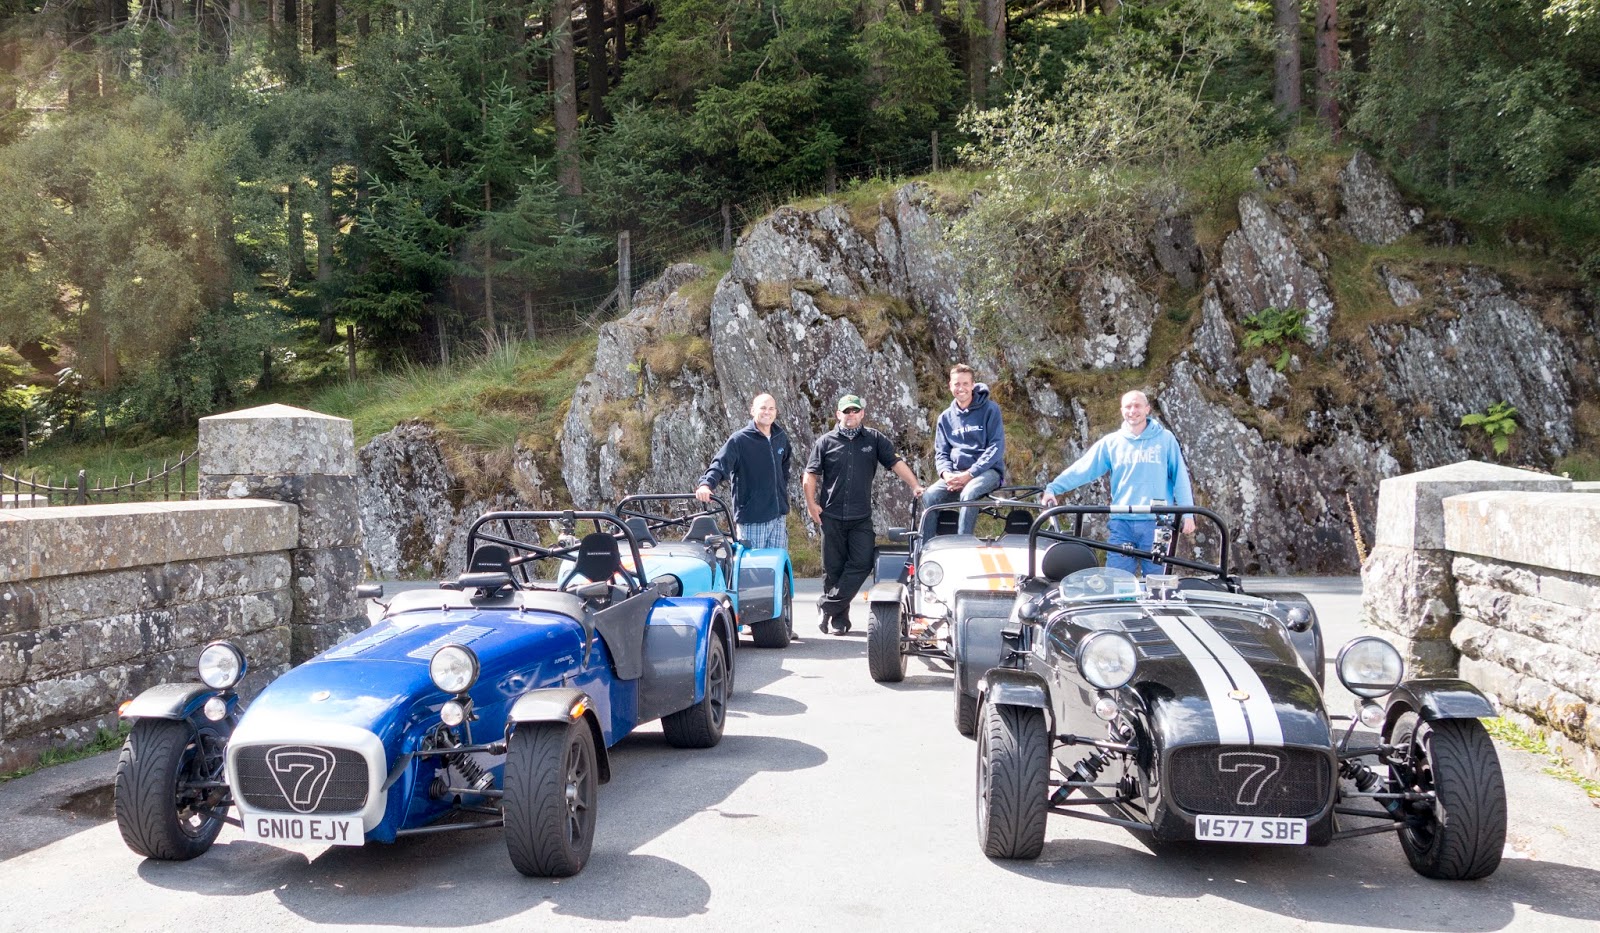 left to right... Me, Steve, Alex and Andy with our Caterhams at the Pen Y Garreg Dam.